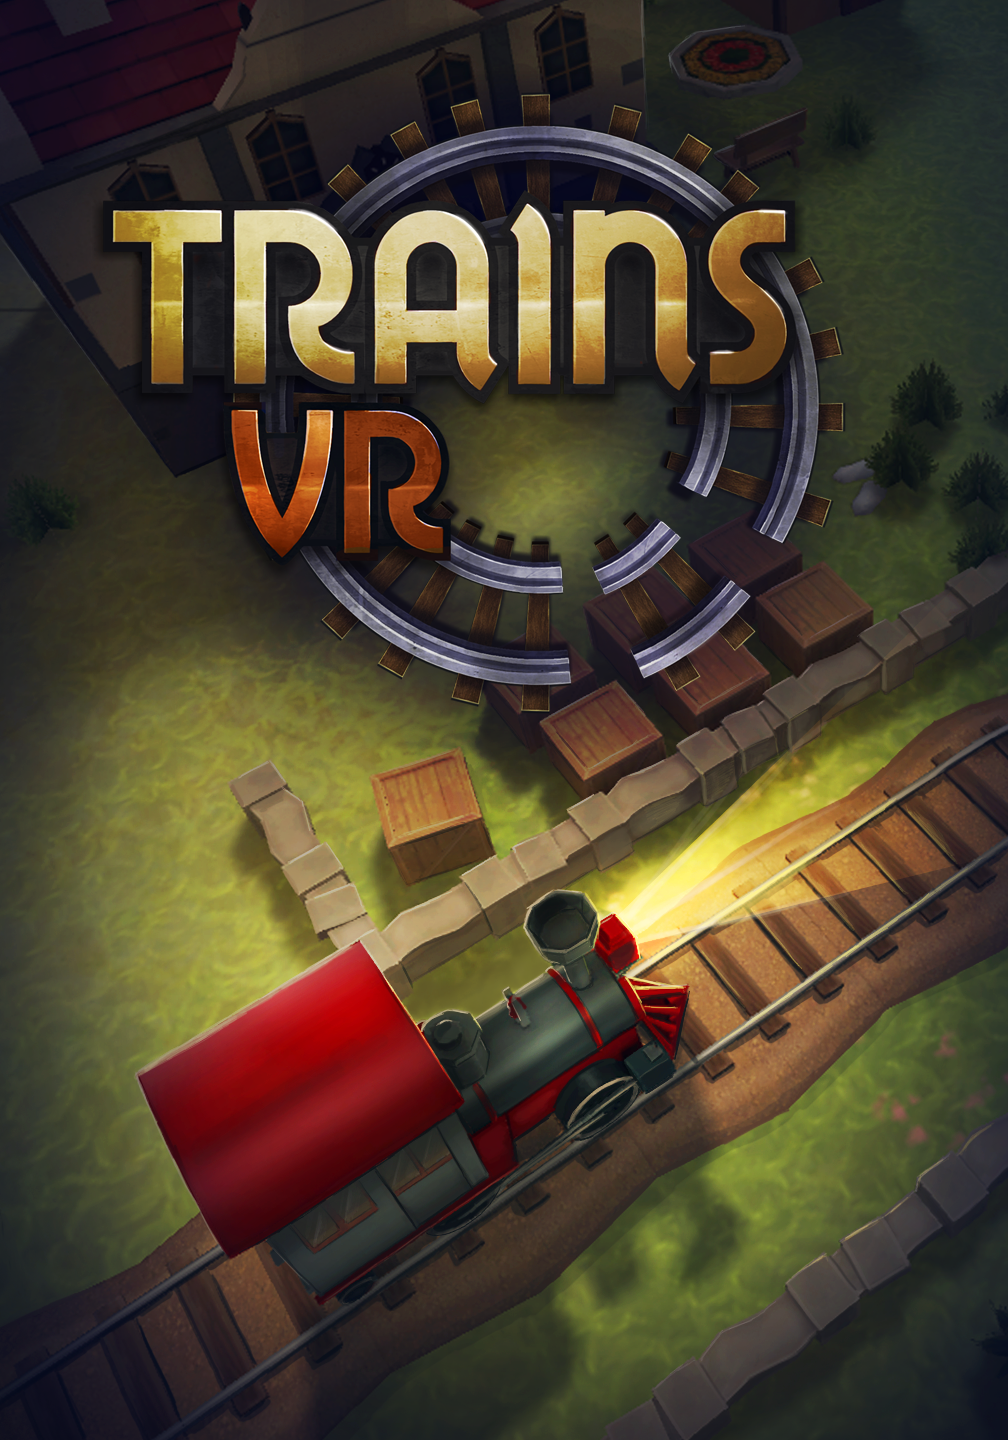 Image of Trains VR